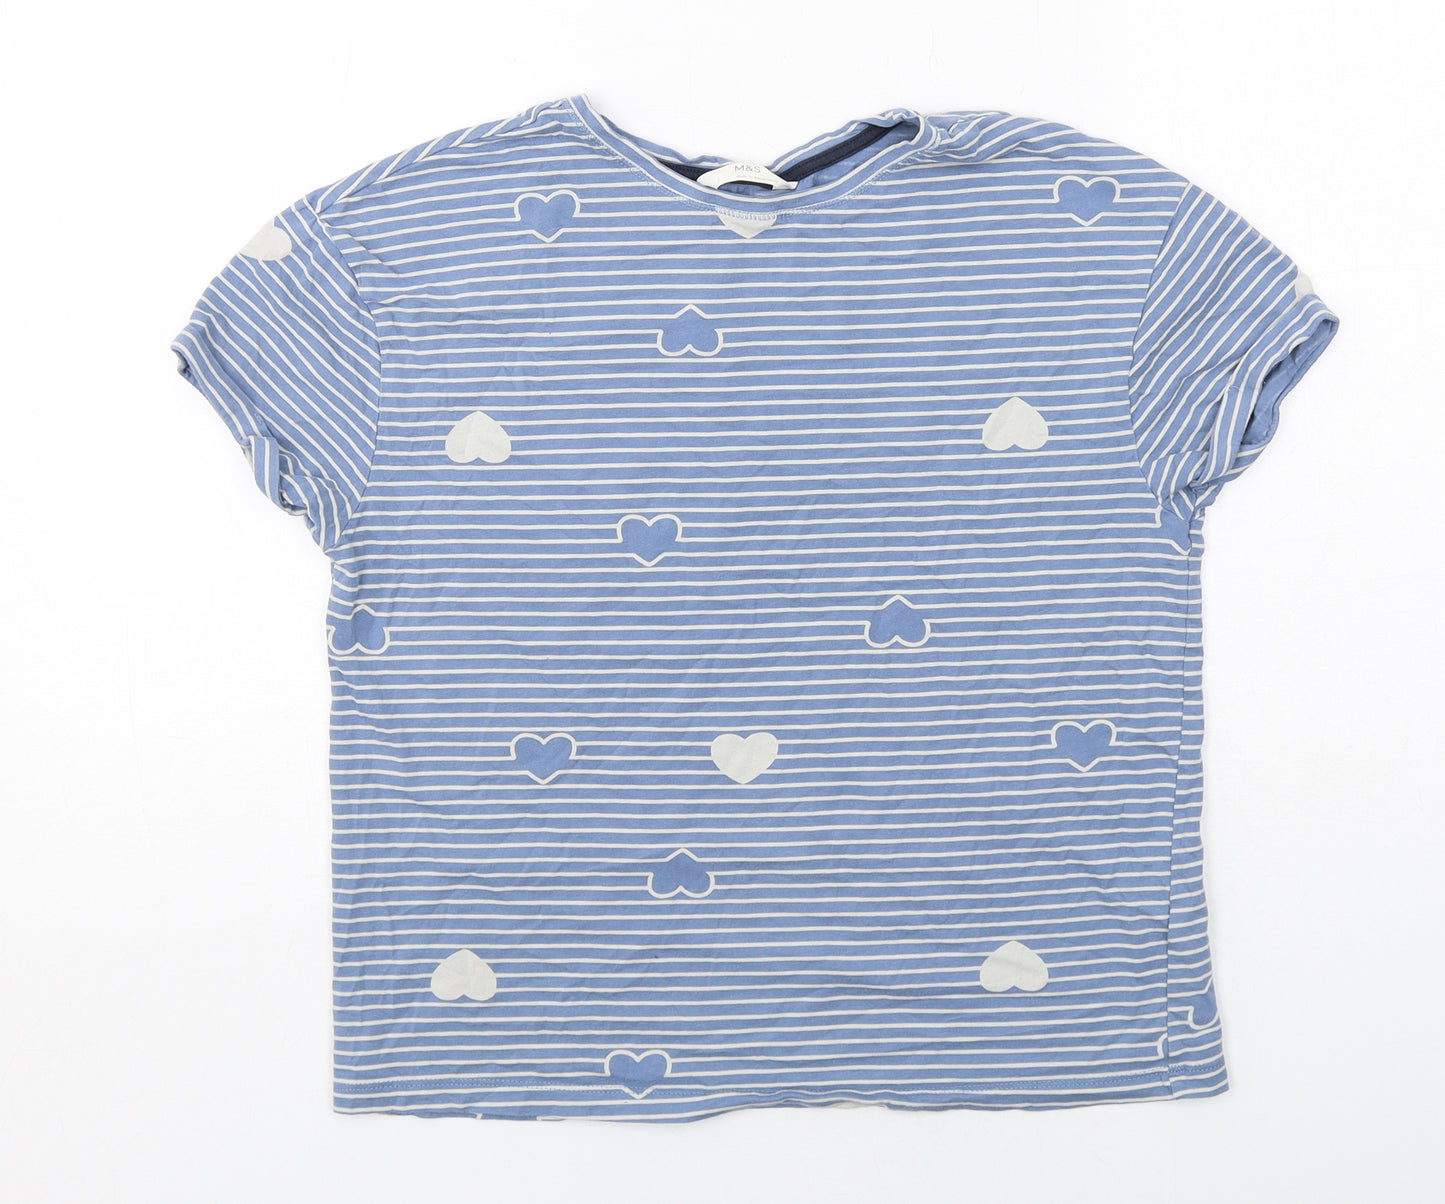 Marks and Spencer Womens Blue Striped Cotton Basic T-Shirt Size S Crew Neck - Heart Pattern